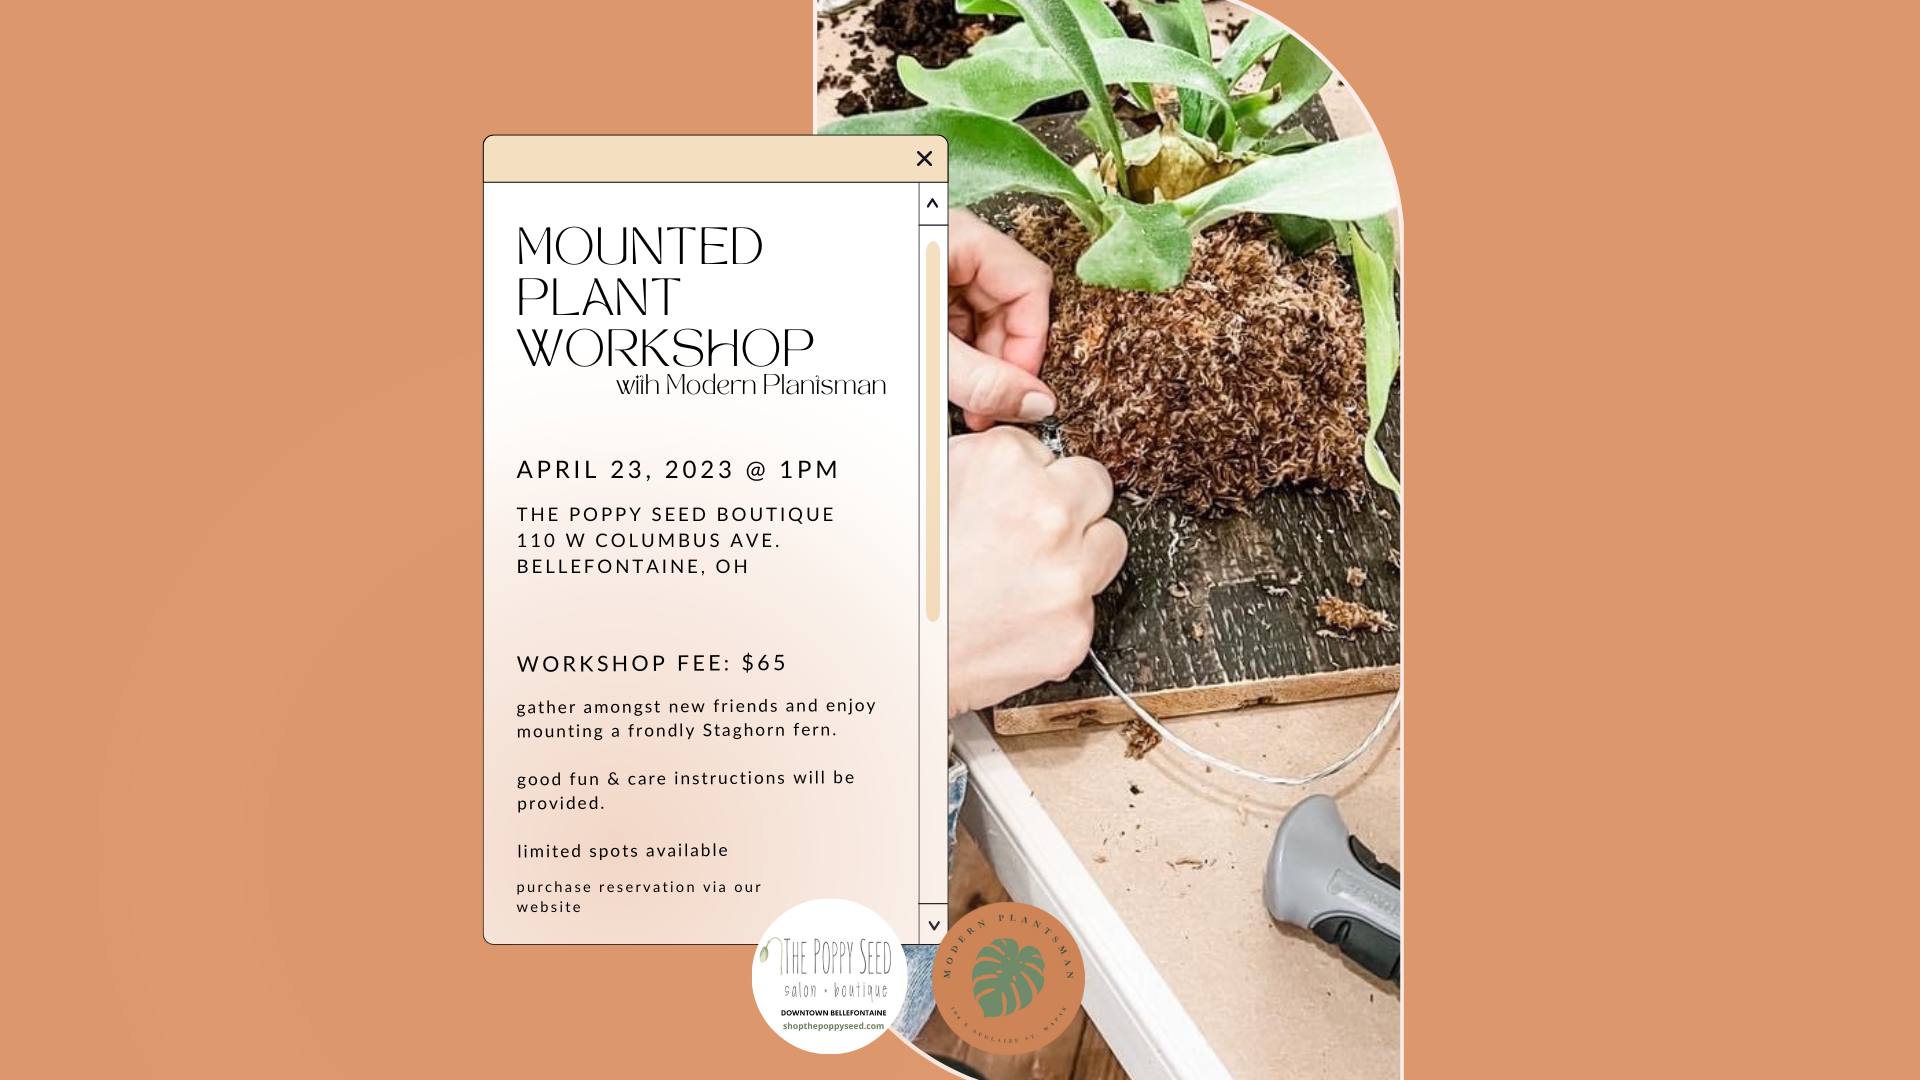 Mounted Plant Workshop @ The Poppy Seed Boutique